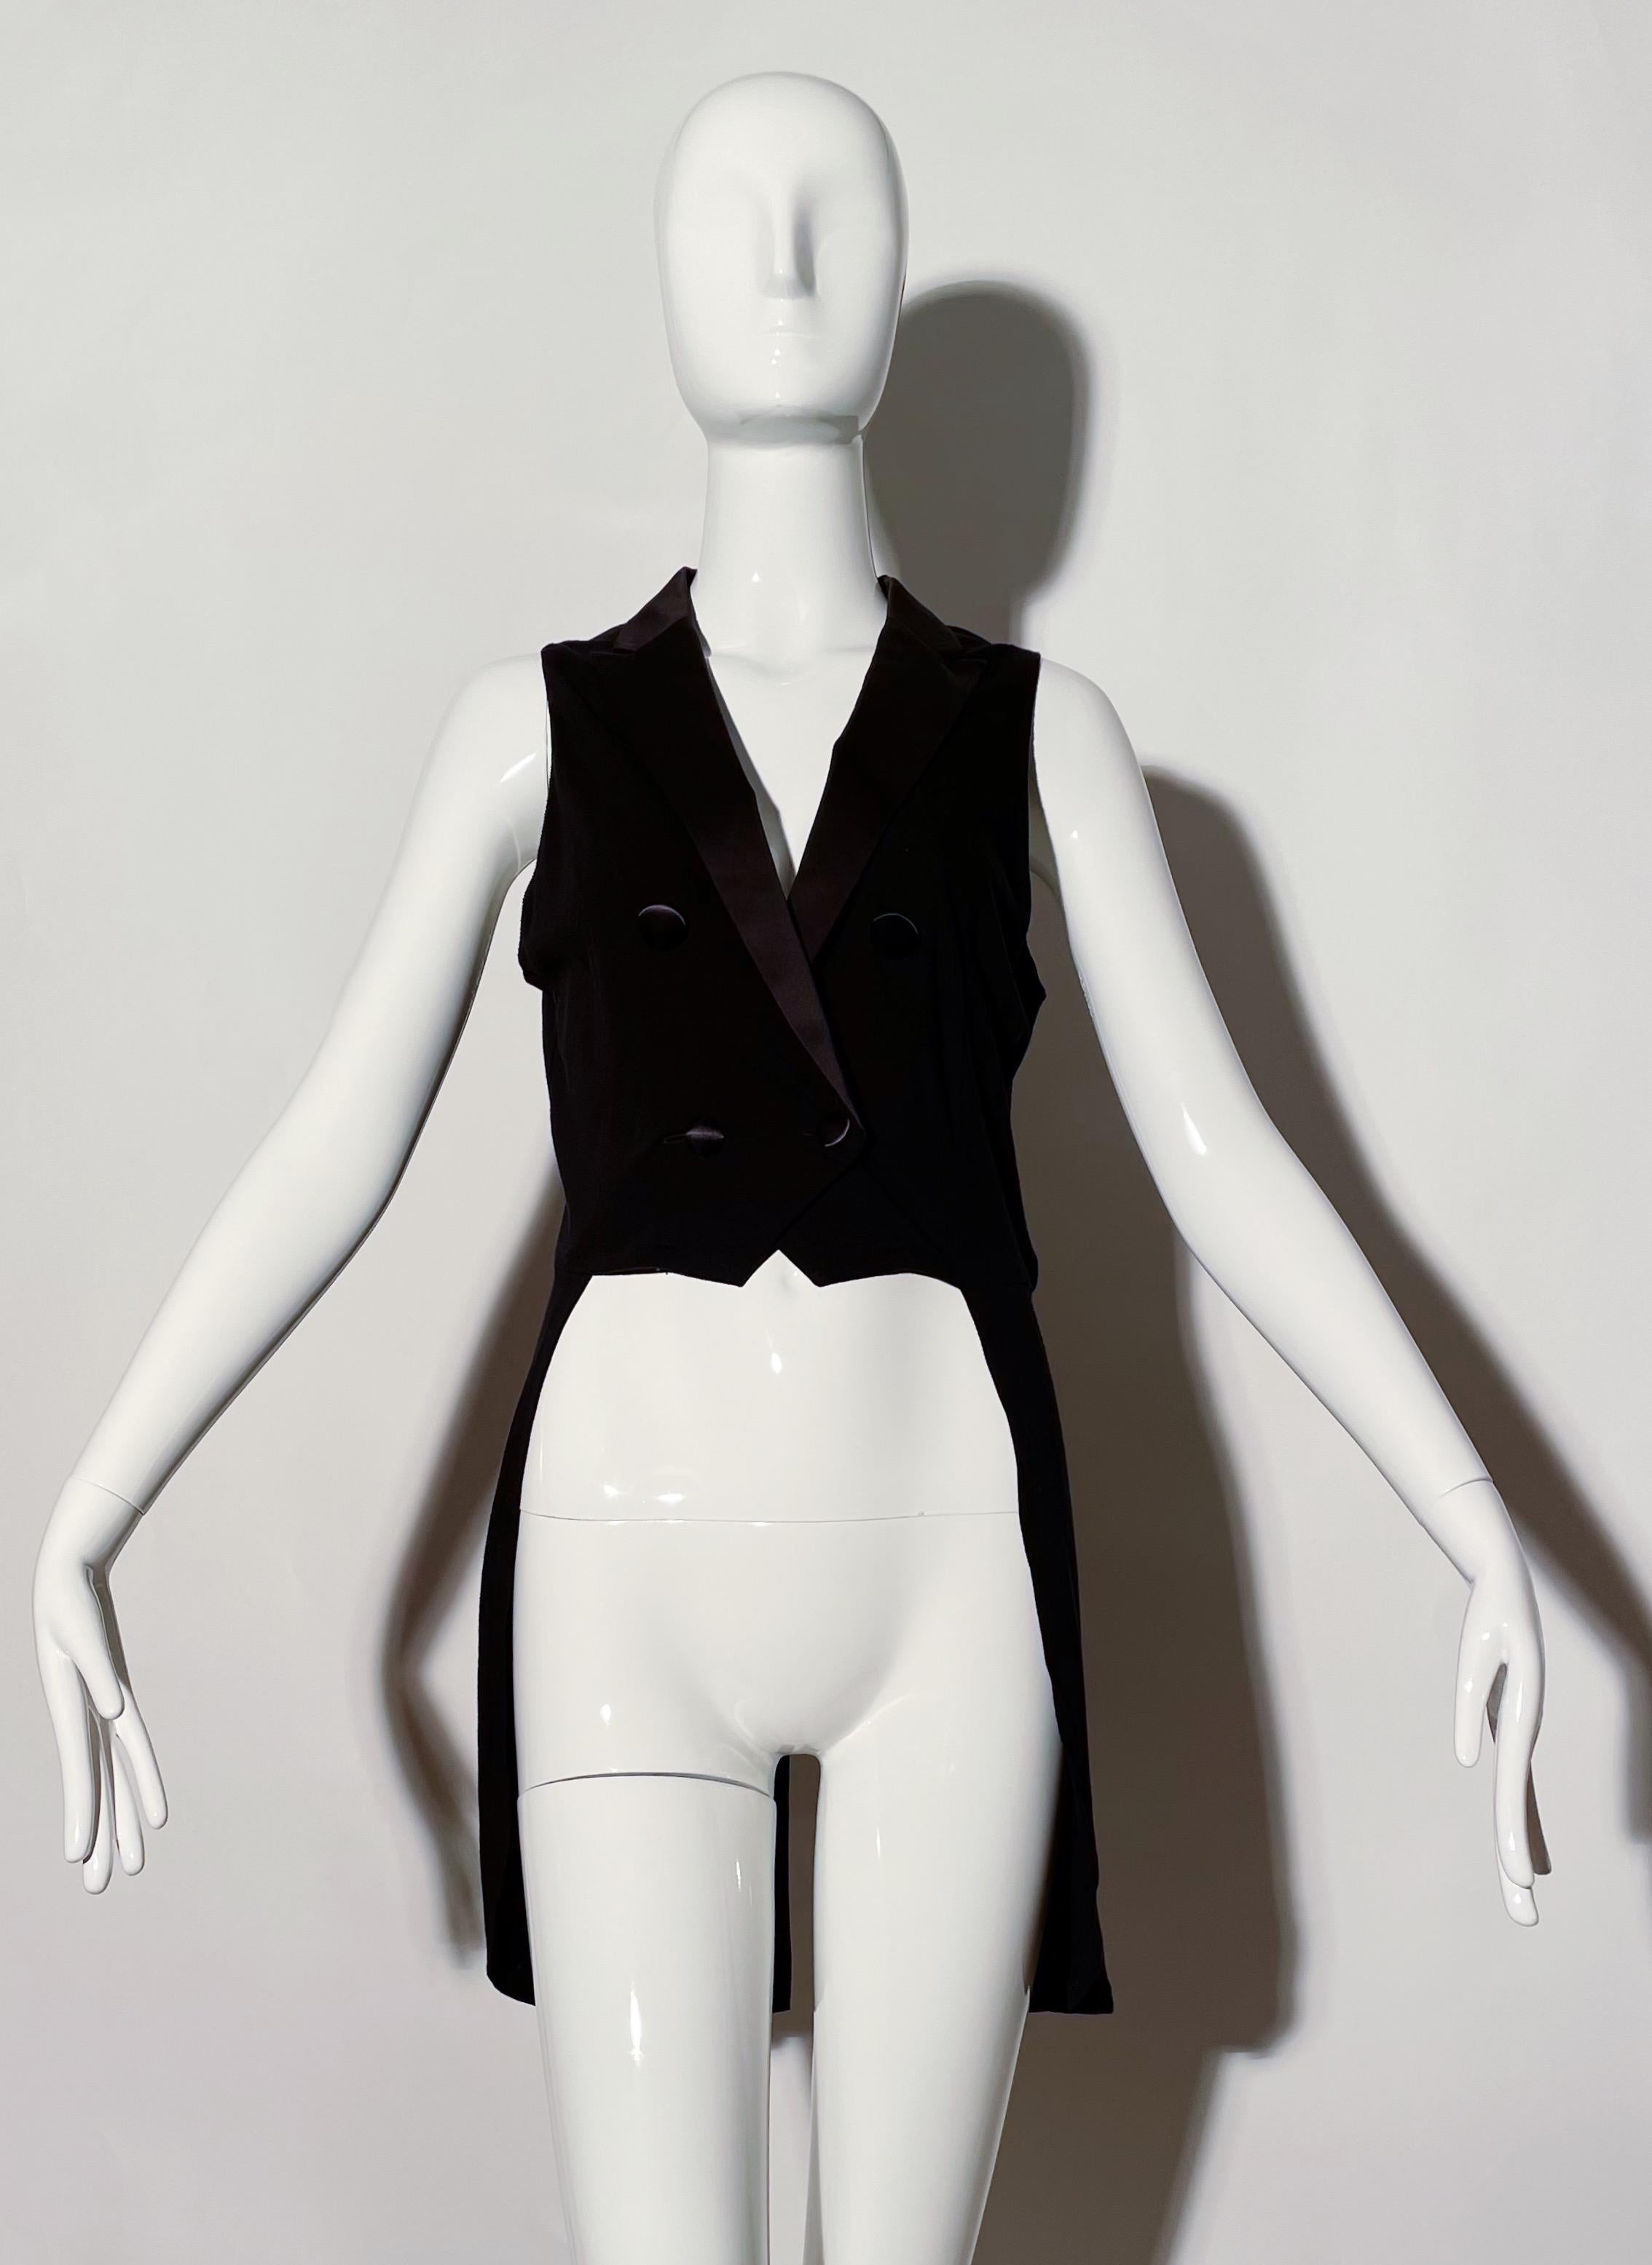 Black tailcoat vest. Satin collar and buttons. Short front, long rear. Cotton. Made in Japan. 
*Condition: excellent vintage condition. No visible flaws.

Measurements Taken Laying Flat (inches)—
Shoulder to Shoulder:  13 in.
Bust: 32 in.
Front